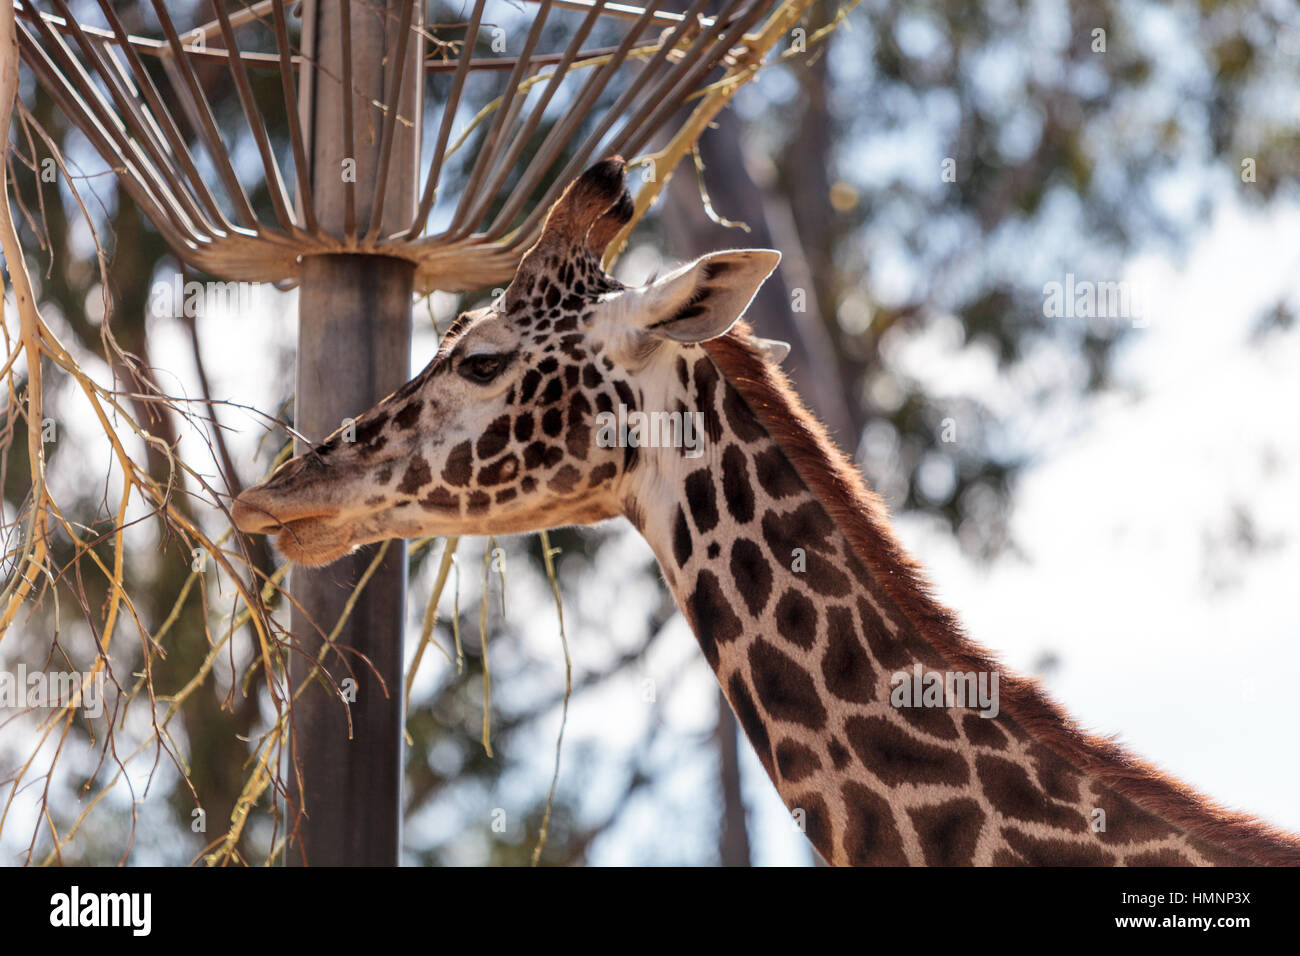 Giraffe are found in Africa and reach a height between 15 and 20 feet tall, with a very long neck. Stock Photo